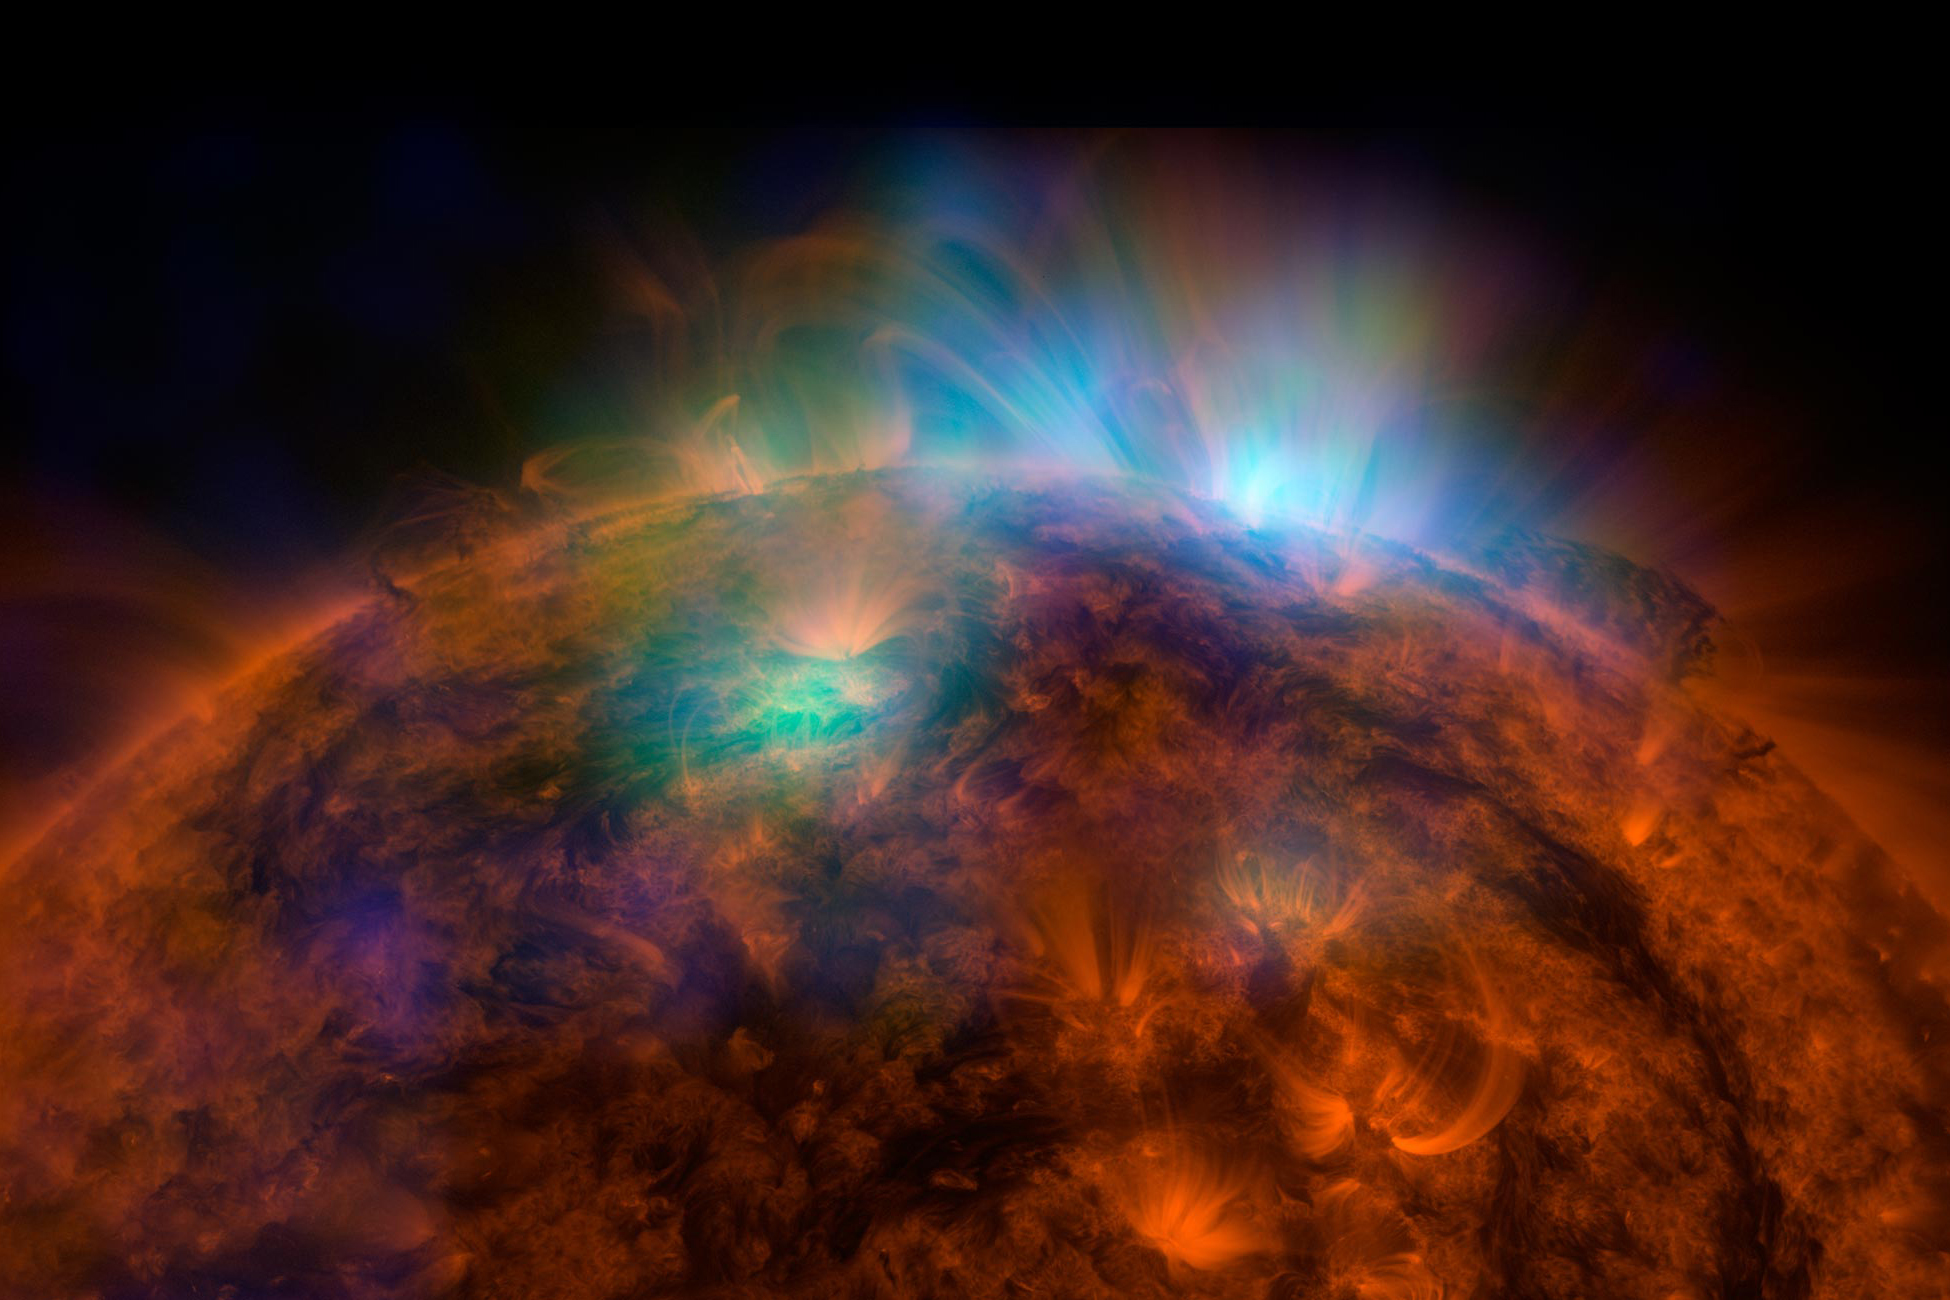 NASA's Nuclear Spectroscopic Telescope Array's first picture of the sun taken in high-energy X-rays released on Dec. 22, 2014.